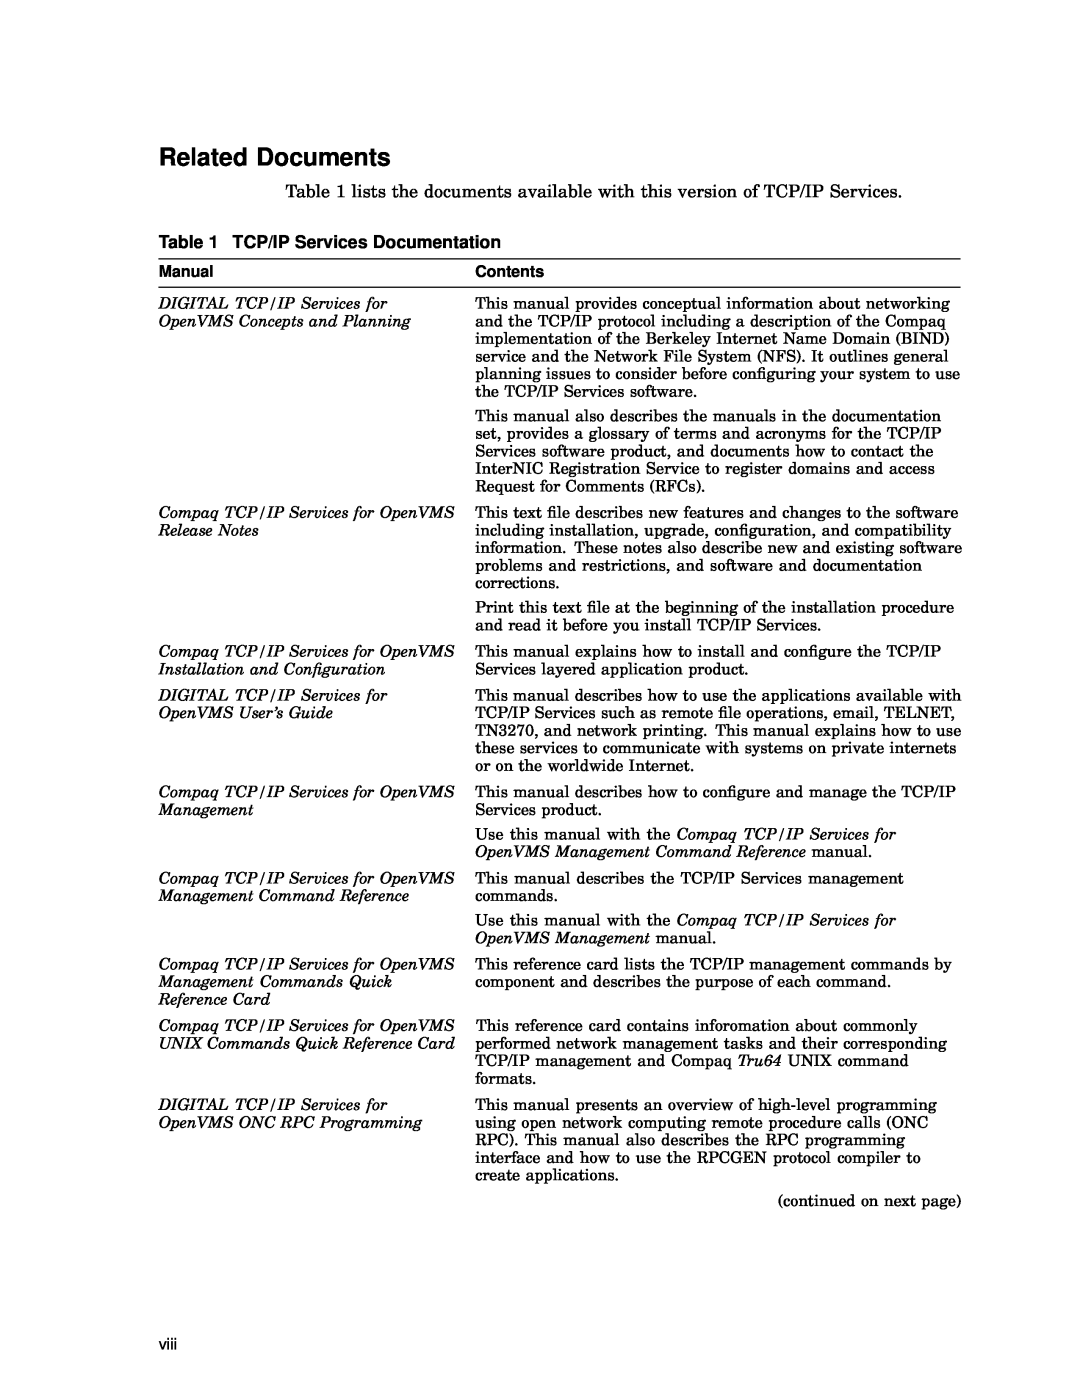 Compaq AAR04BCTE manual Related Documents, TCP/IP Services Documentation, Manual, Contents 